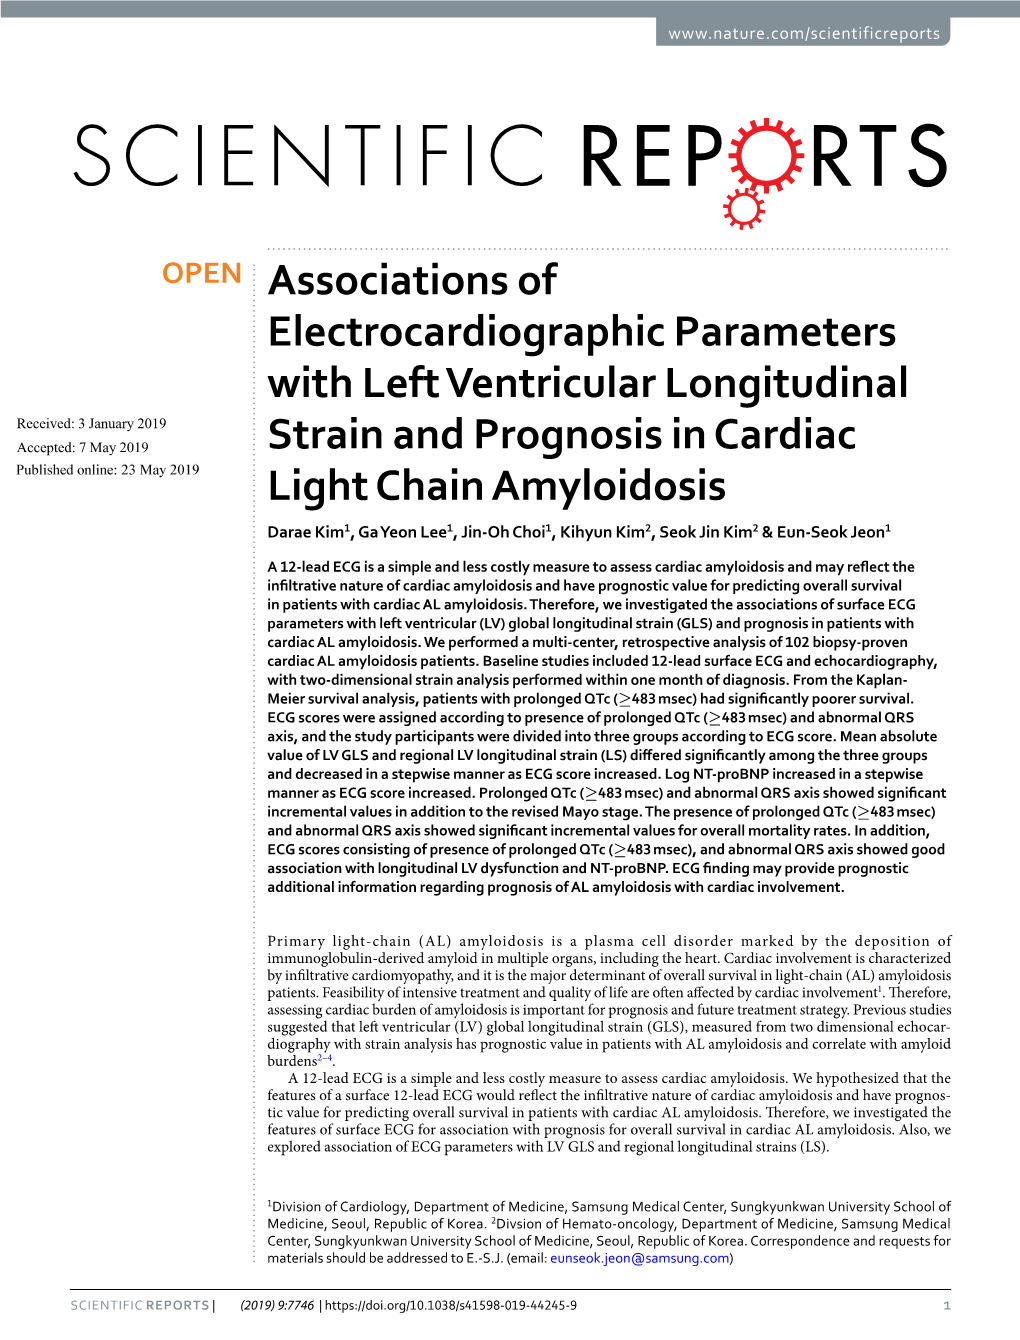 Associations of Electrocardiographic Parameters with Left Ventricular